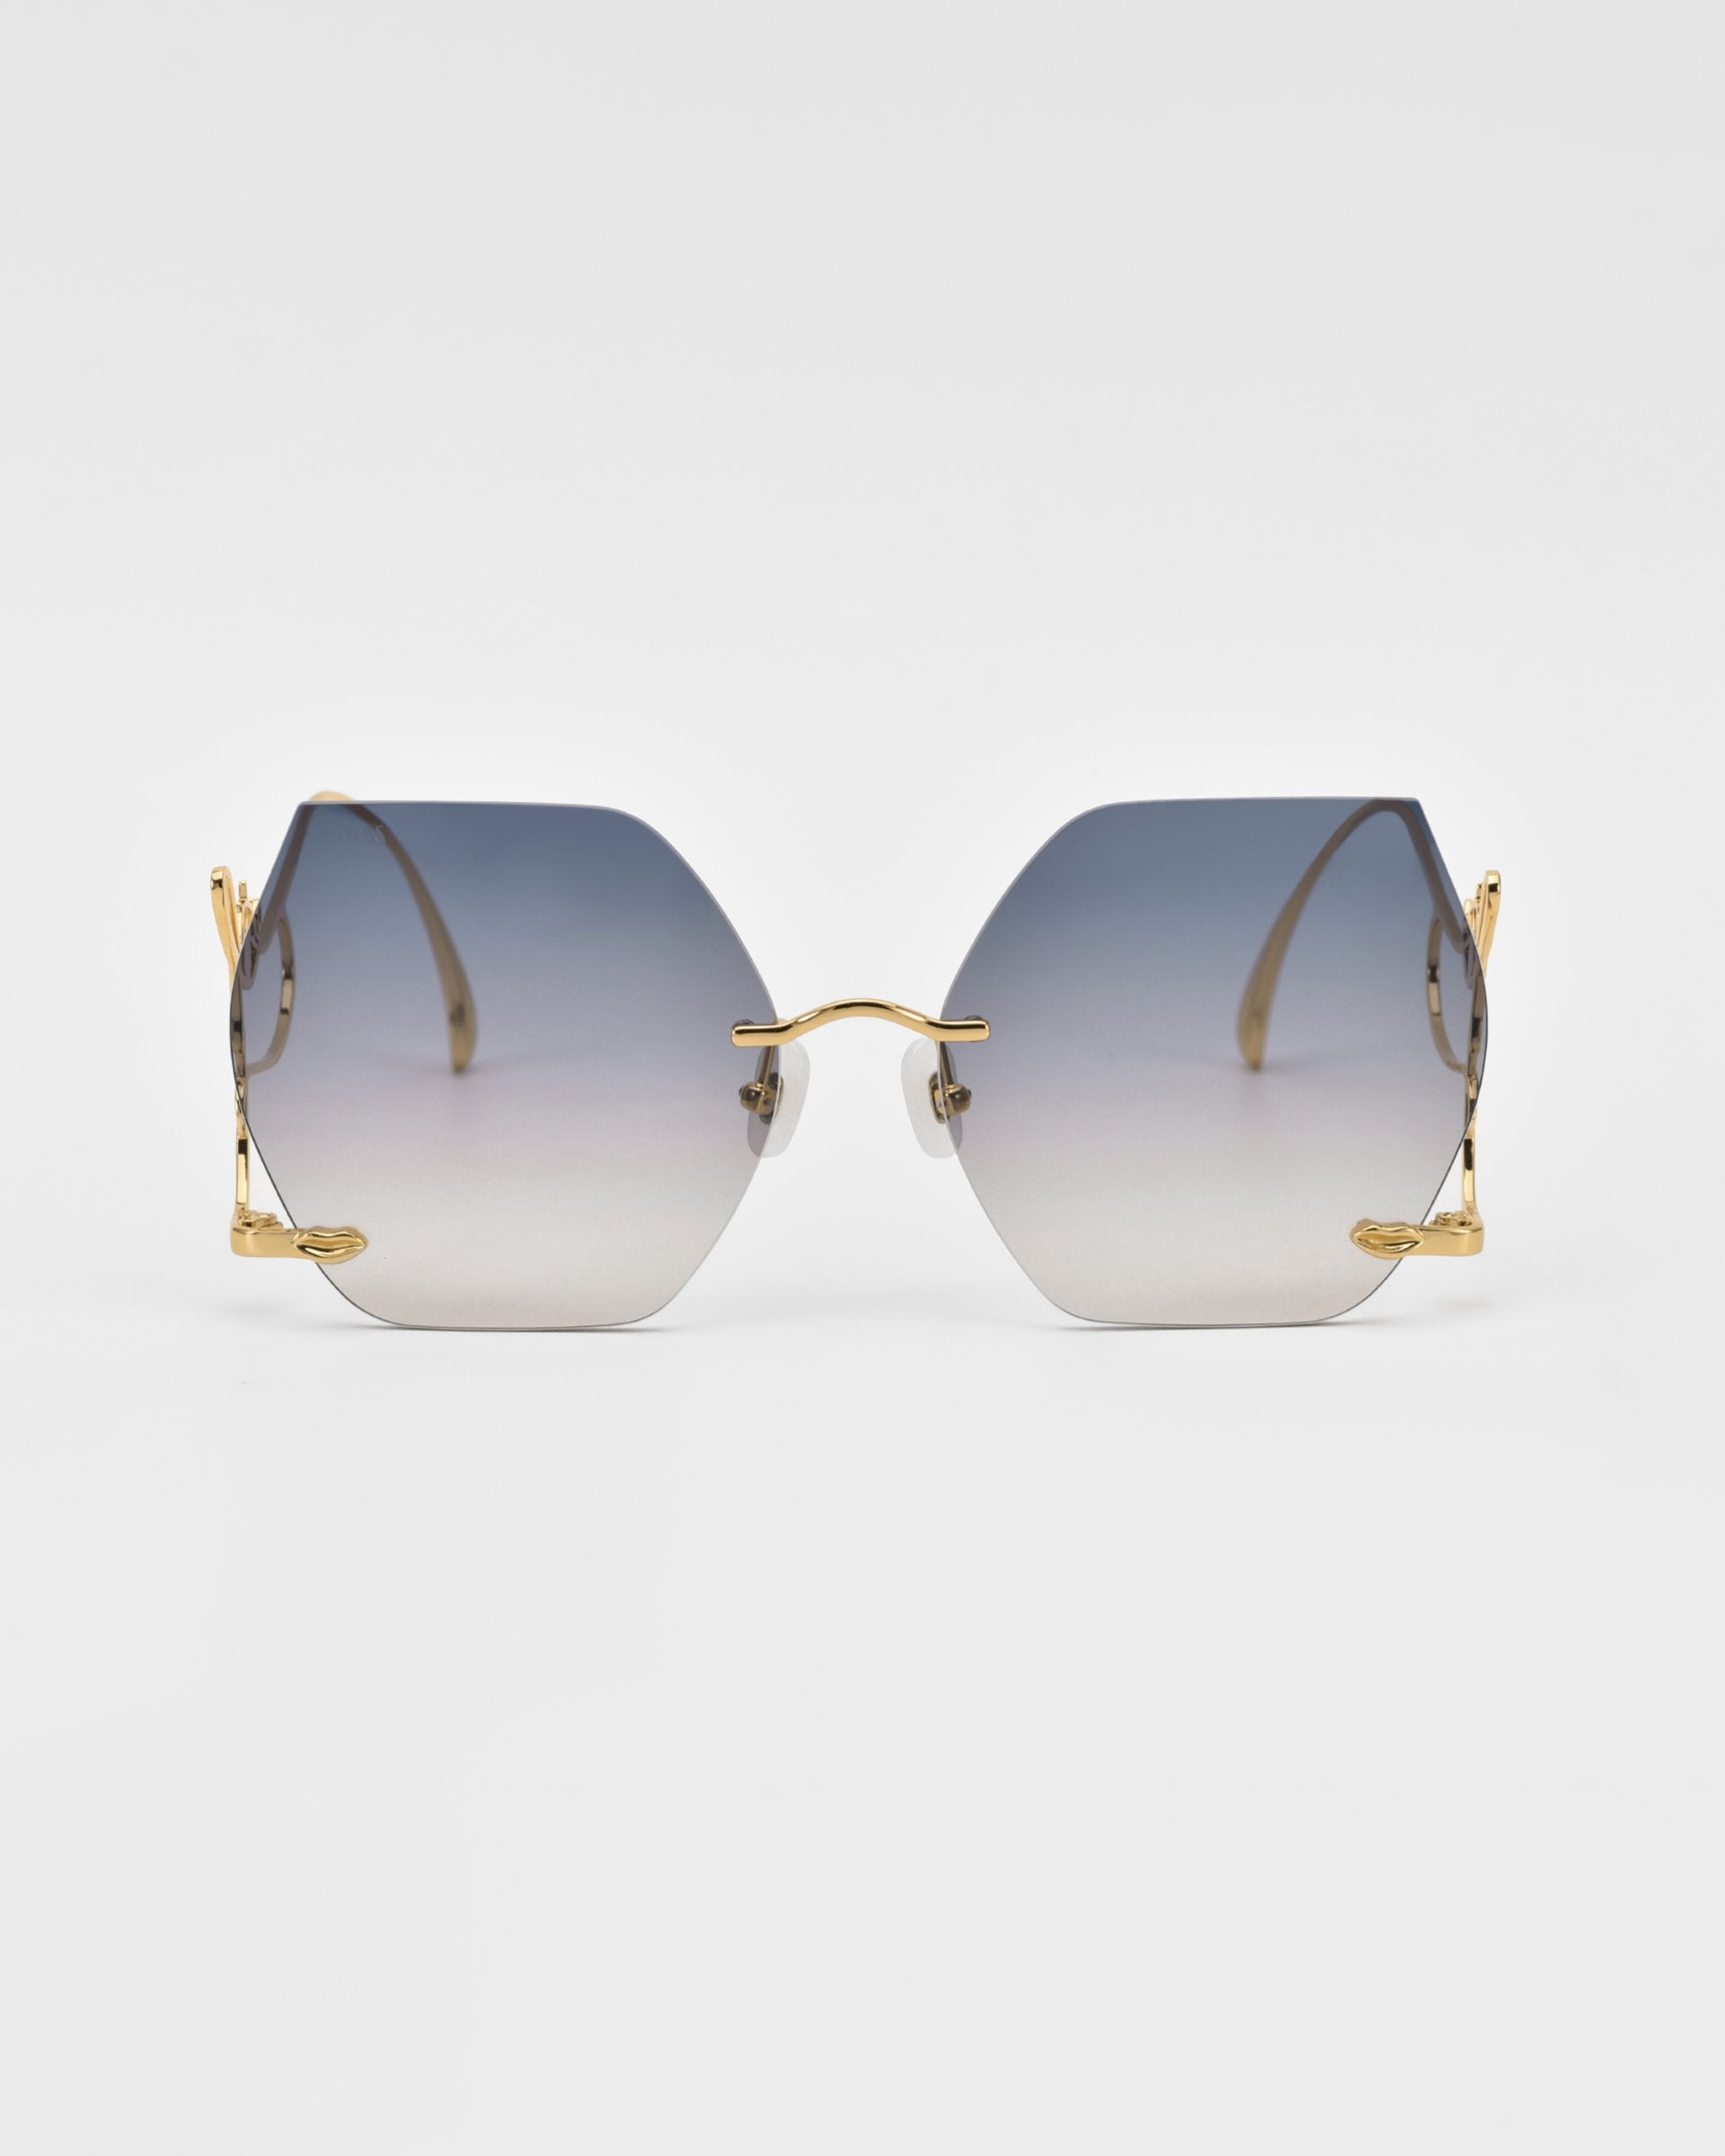 A pair of For Art's Sake® Cry Me a River hexagonal gradient sunglasses with gold frames is displayed against a plain white background. The lenses transition from dark at the top to nearly clear at the bottom, and the thin arms feature intricate detailing near the hinges.